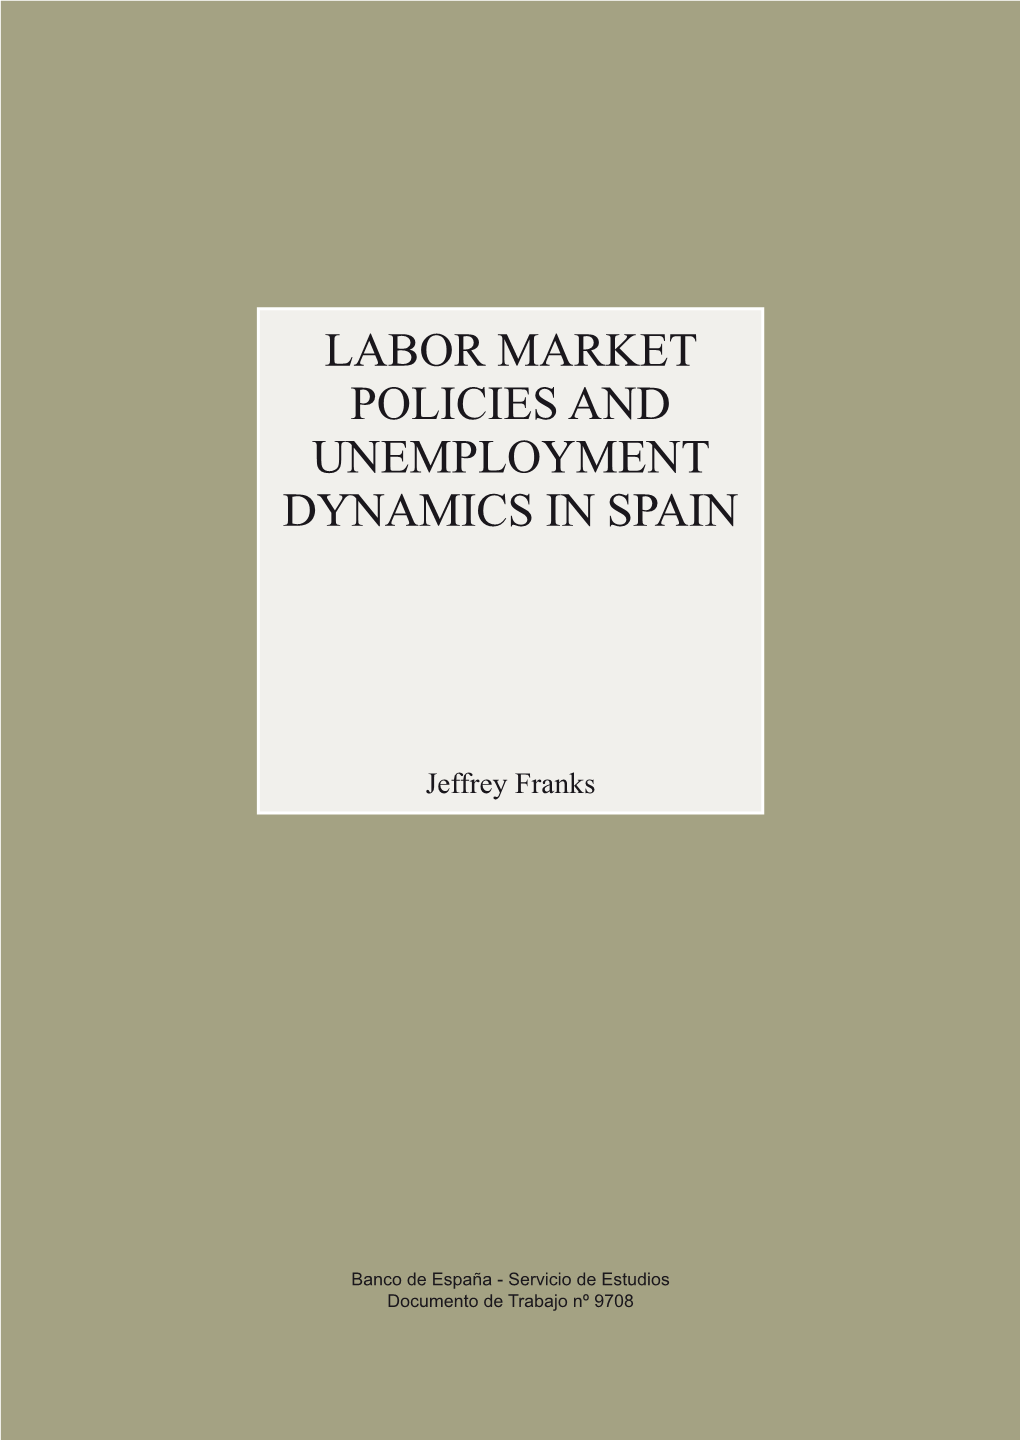 Labour Market Policies and Unemployment Dynamics in Spain